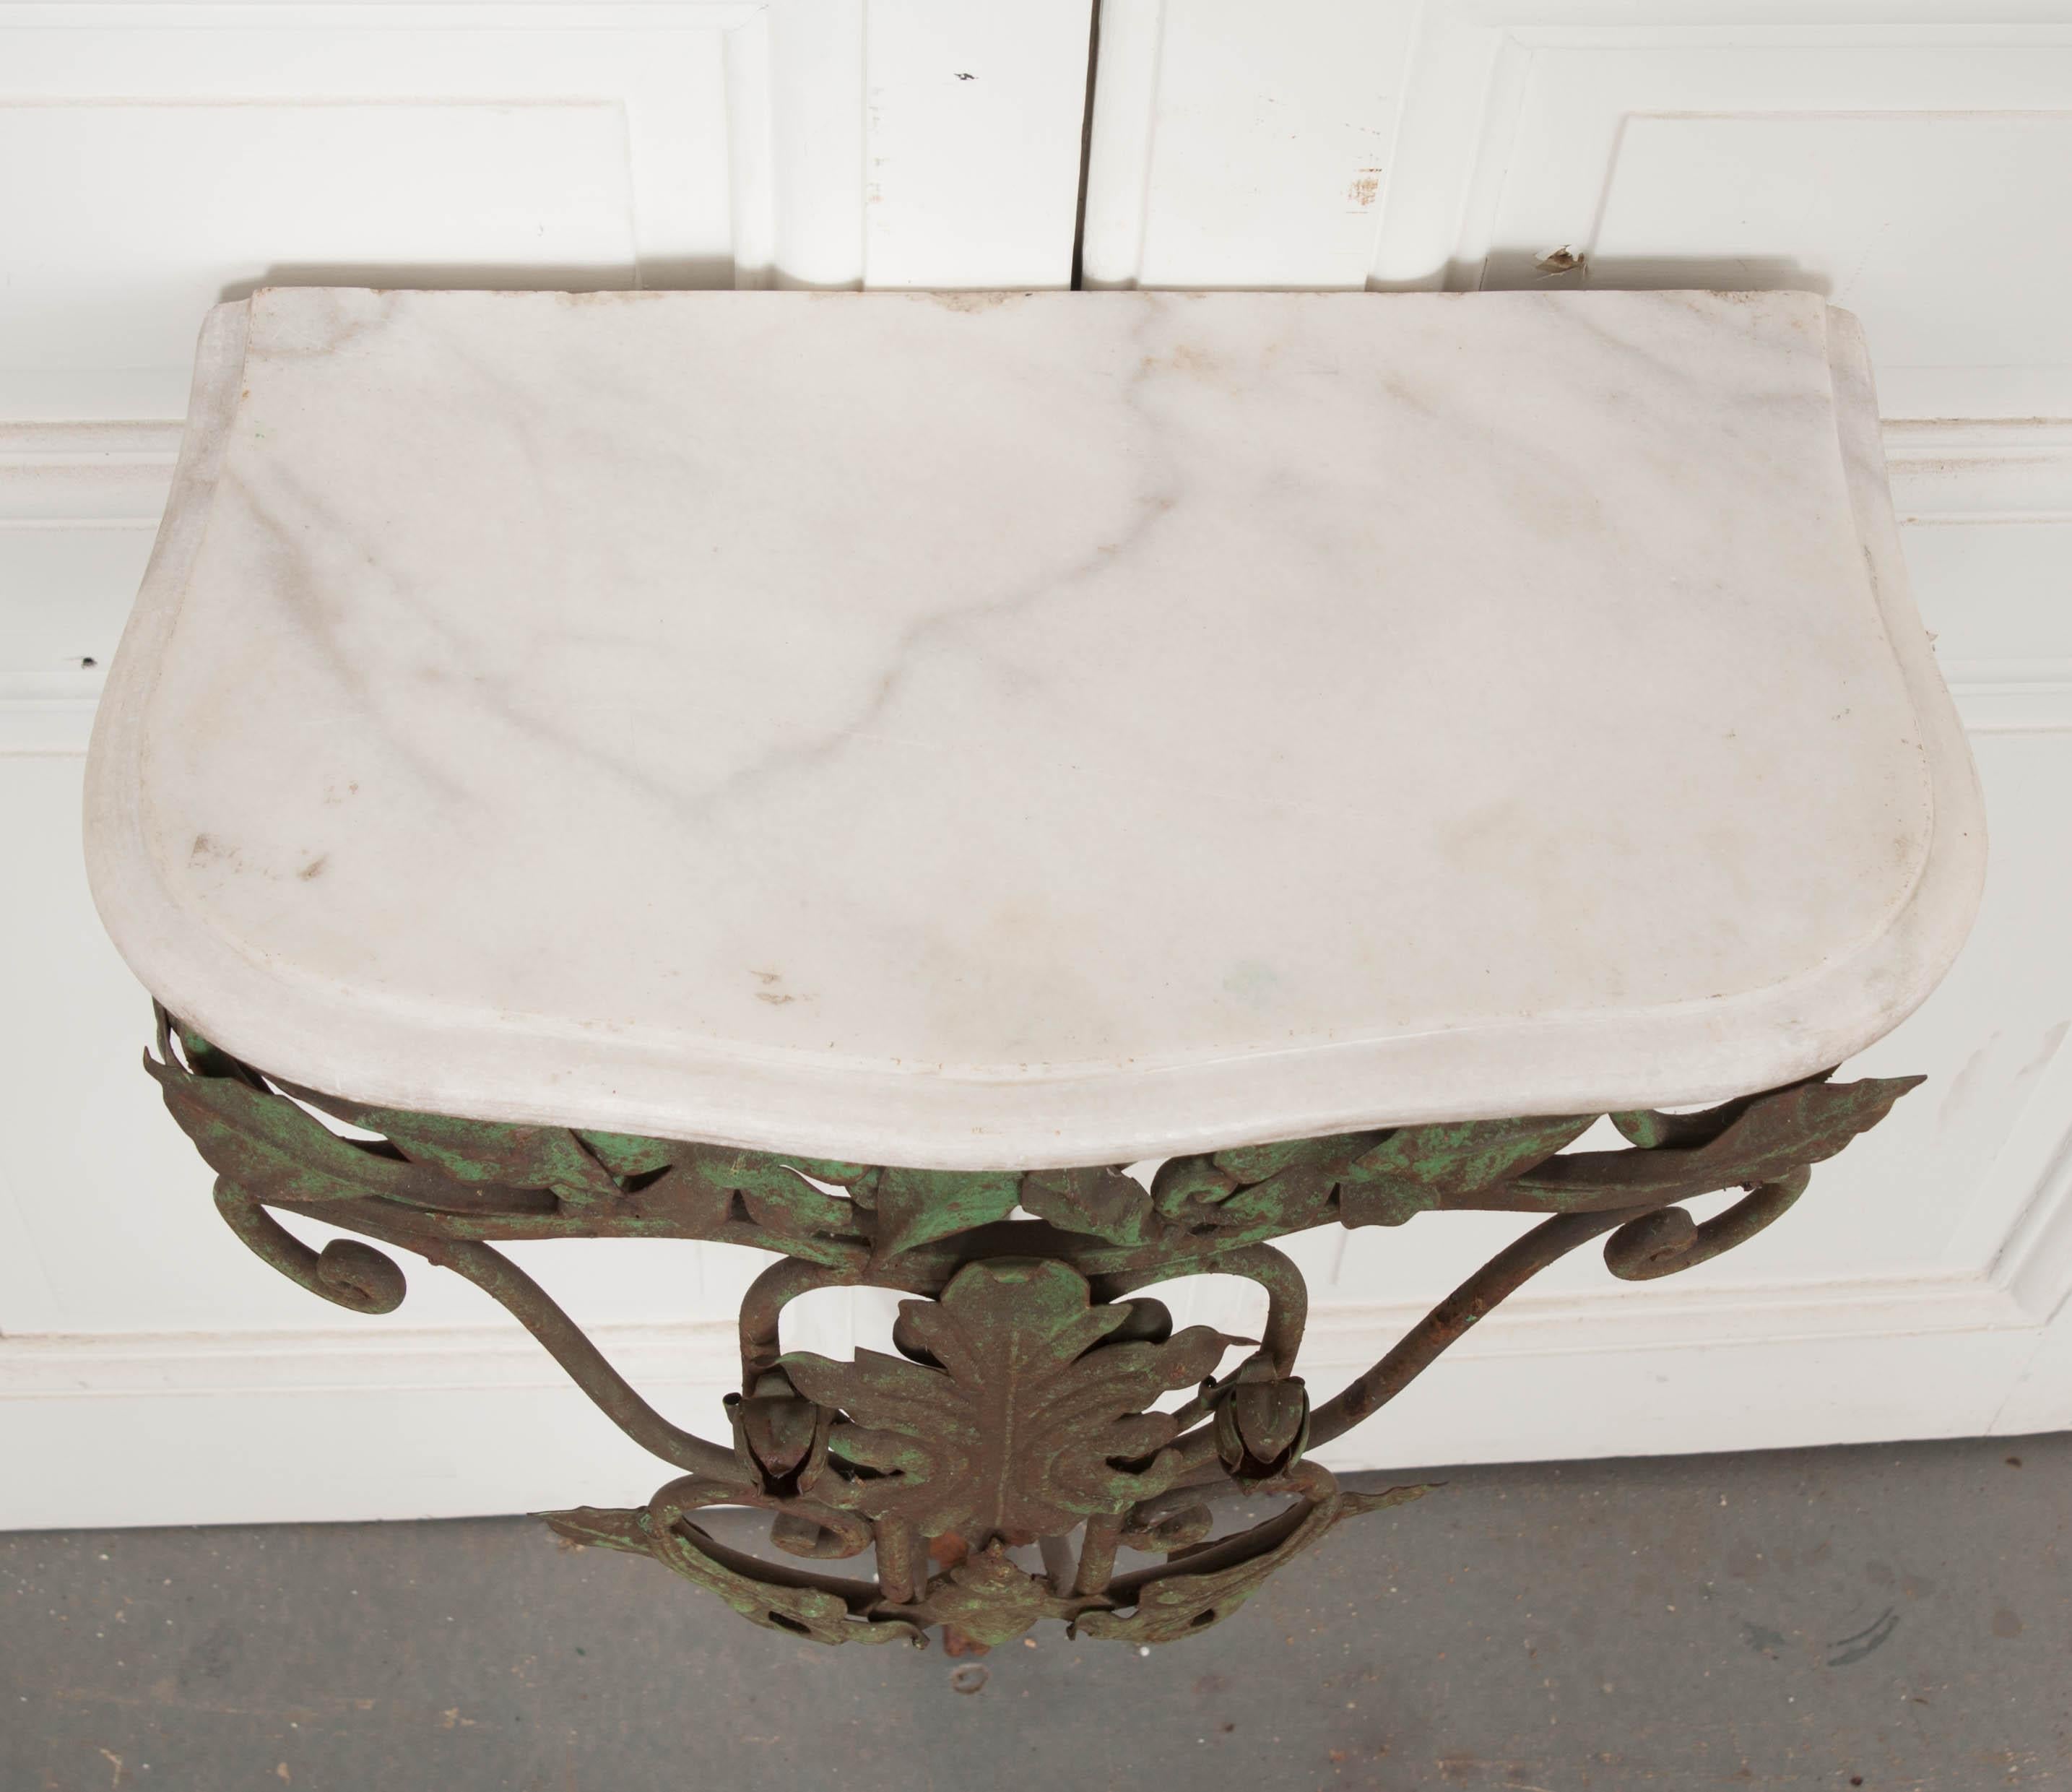 This lovely verdigris-painted iron and white marble-top wall-mounted console is from the Netherlands, circa 1920s, and features floral and foliate decor. The diminutive size makes it perfect for smaller interiors.